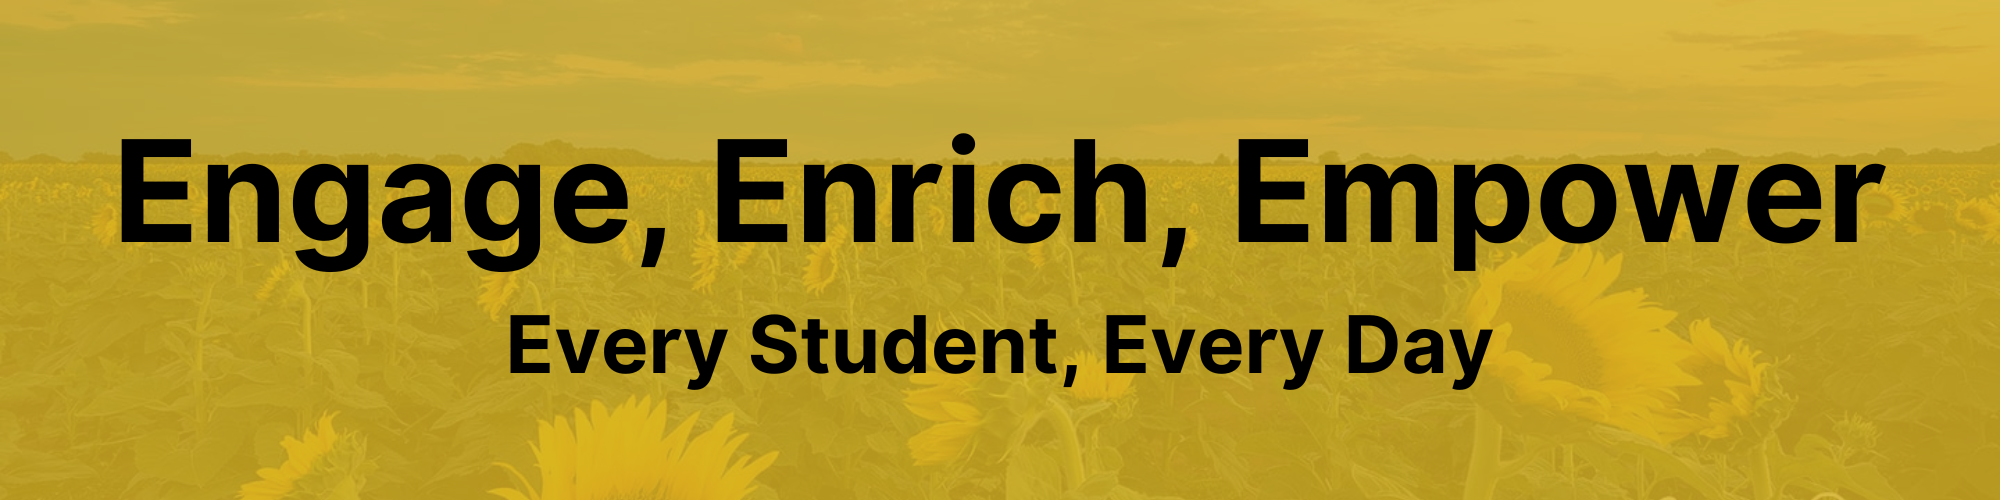 Engage, Enrich, Empower - Every Student, Every Day